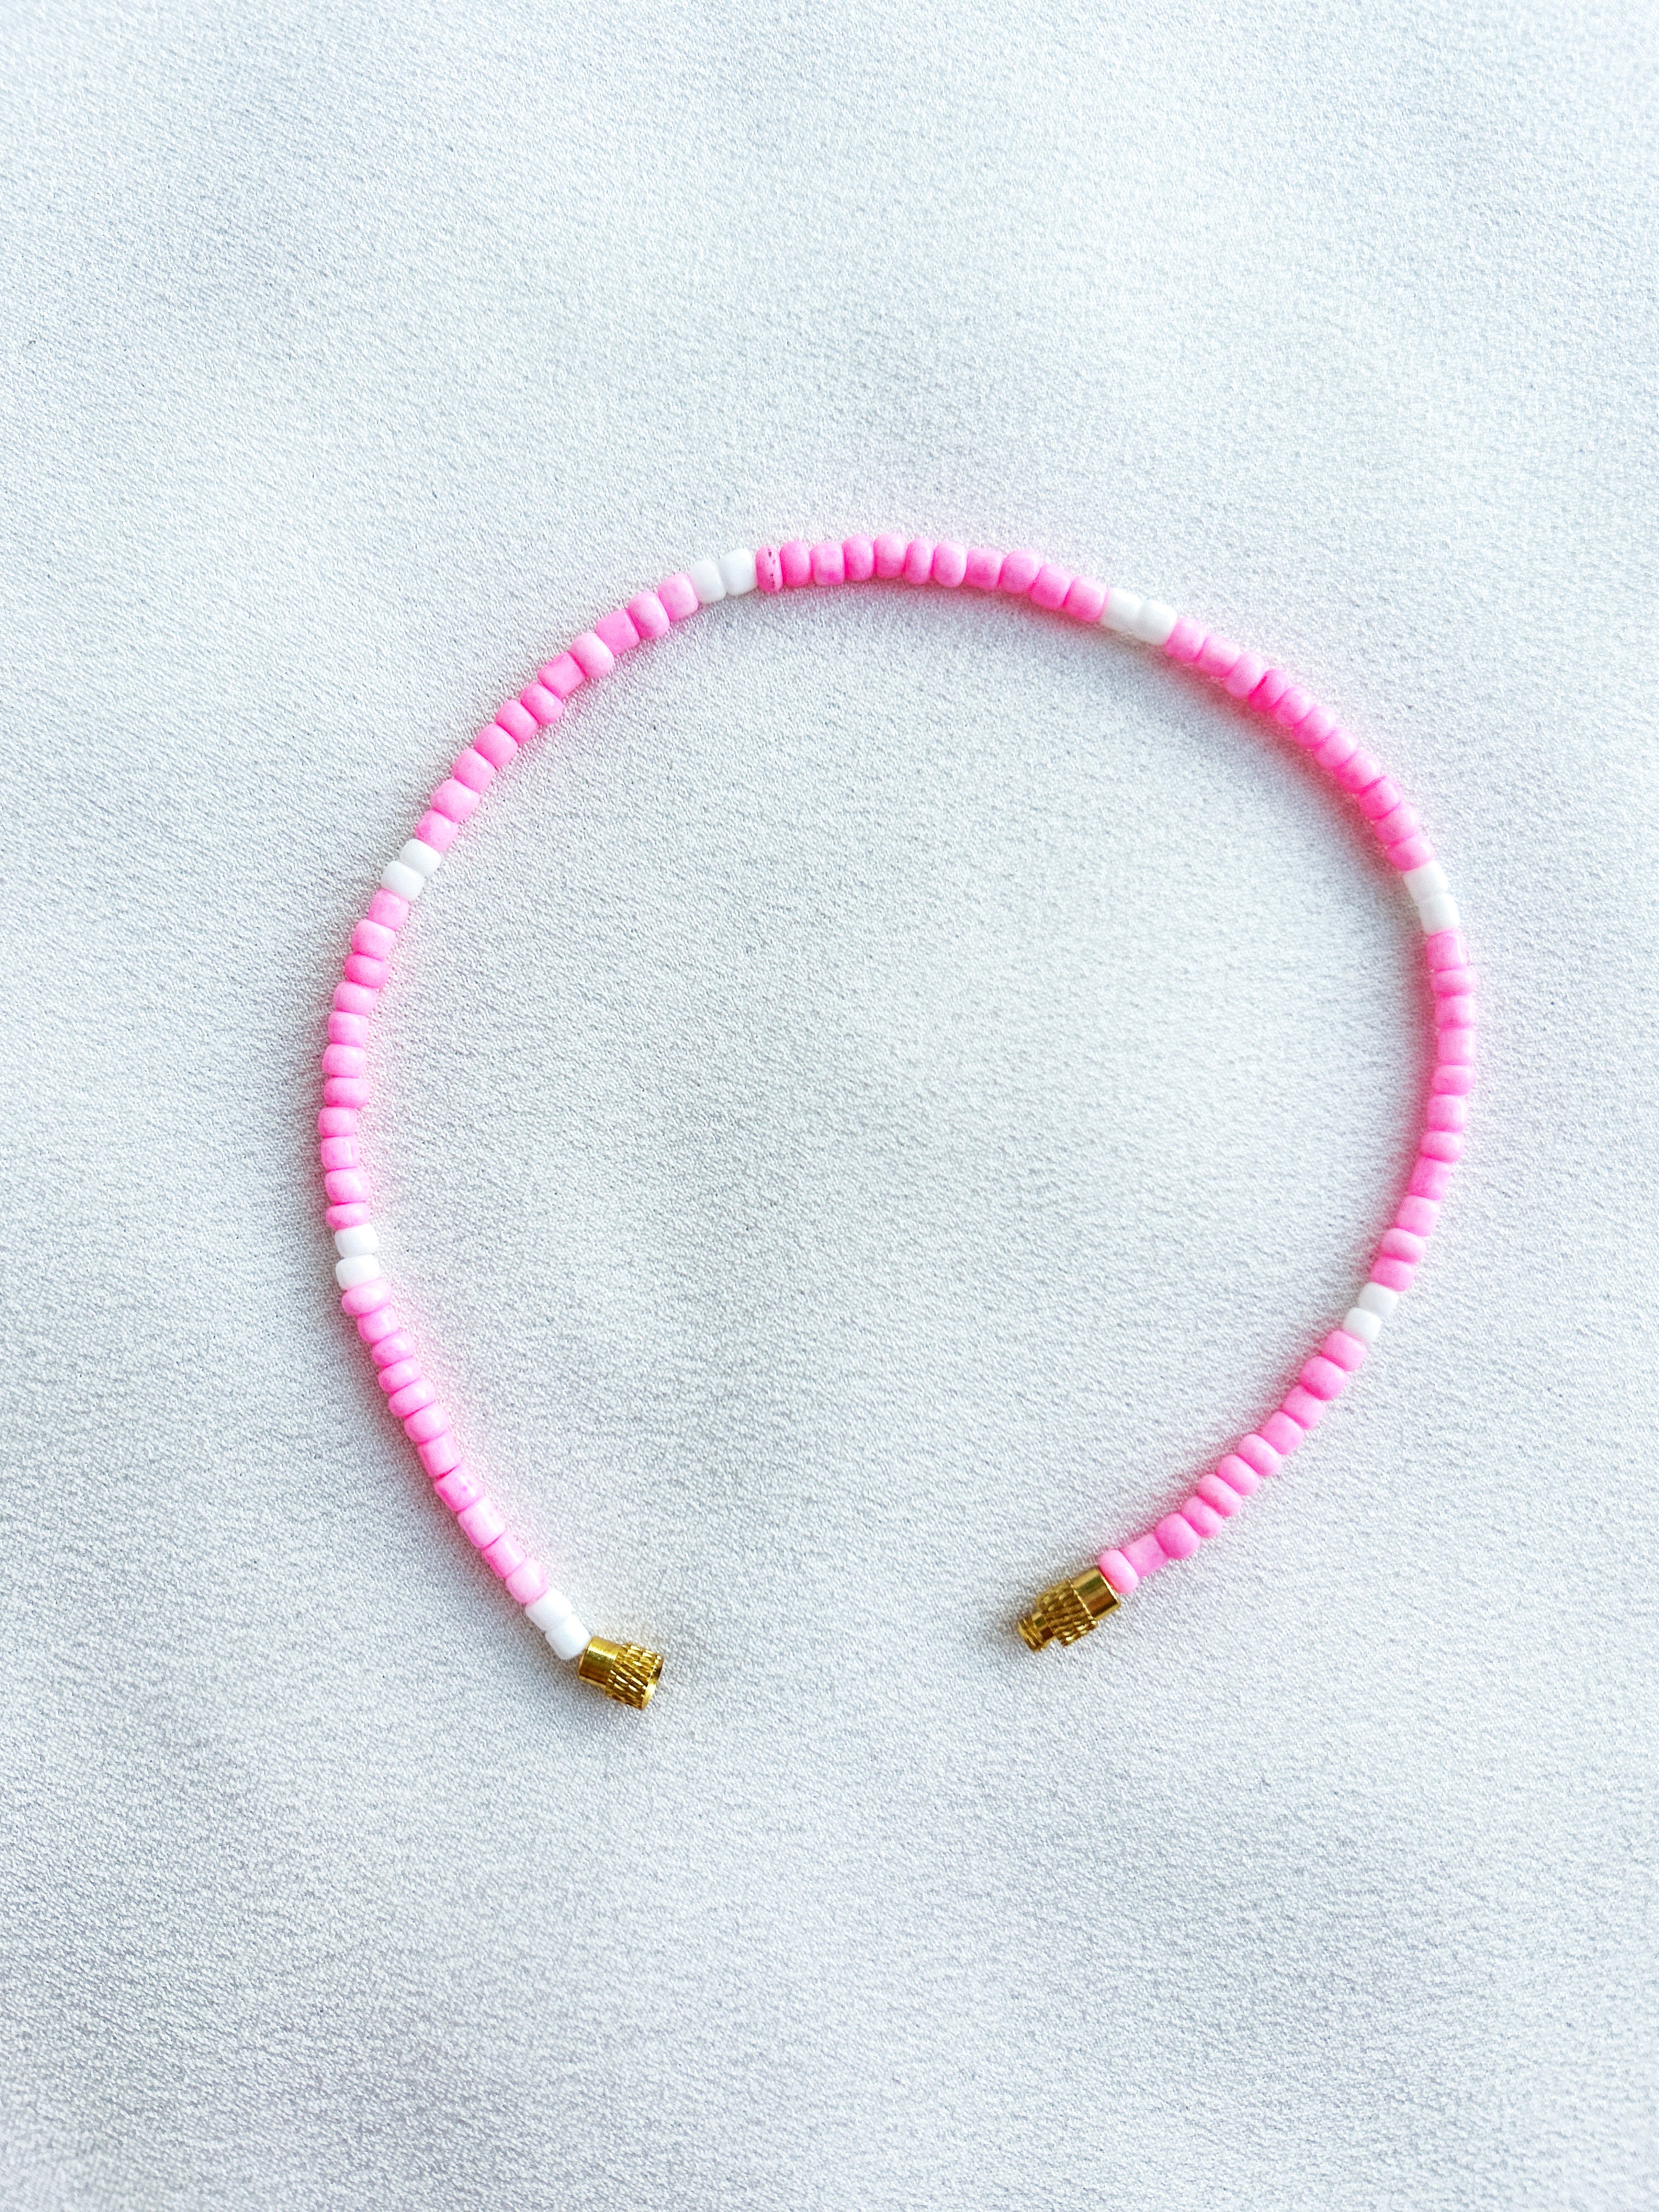 [THE ELEVEN] Anklet/Bracelet: Pink/White [Small Beads]